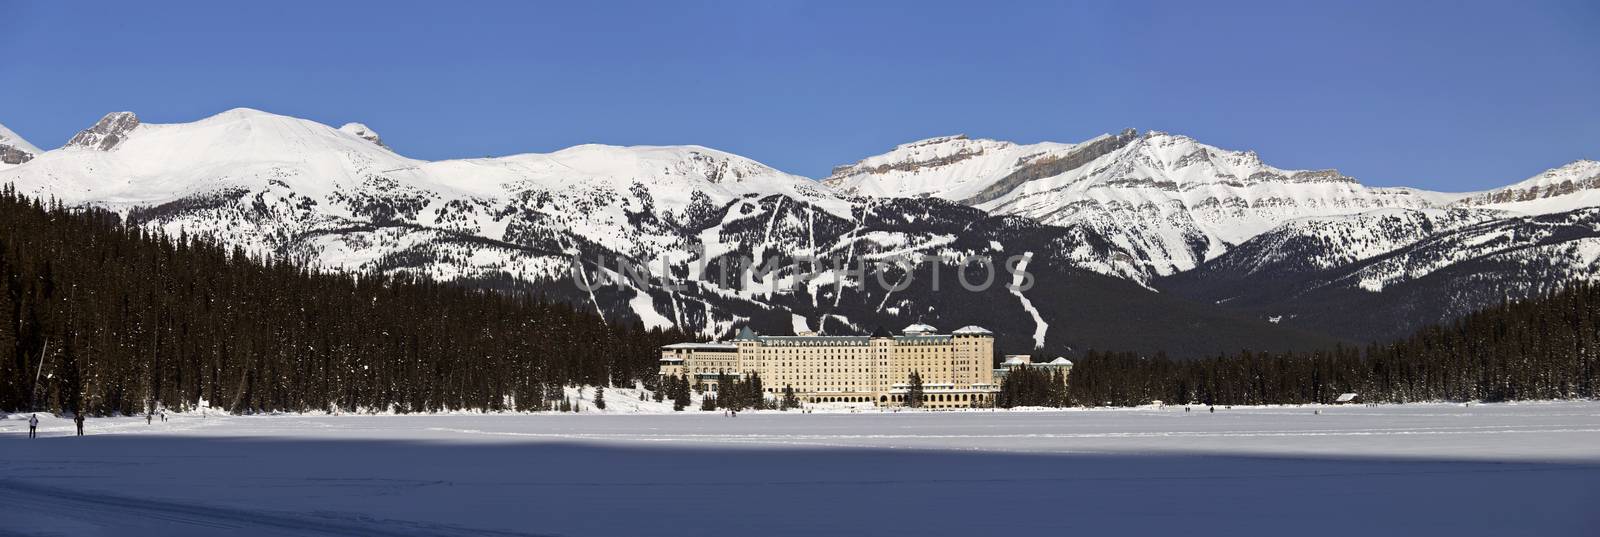 Chateau Lake Louise  by pictureguy